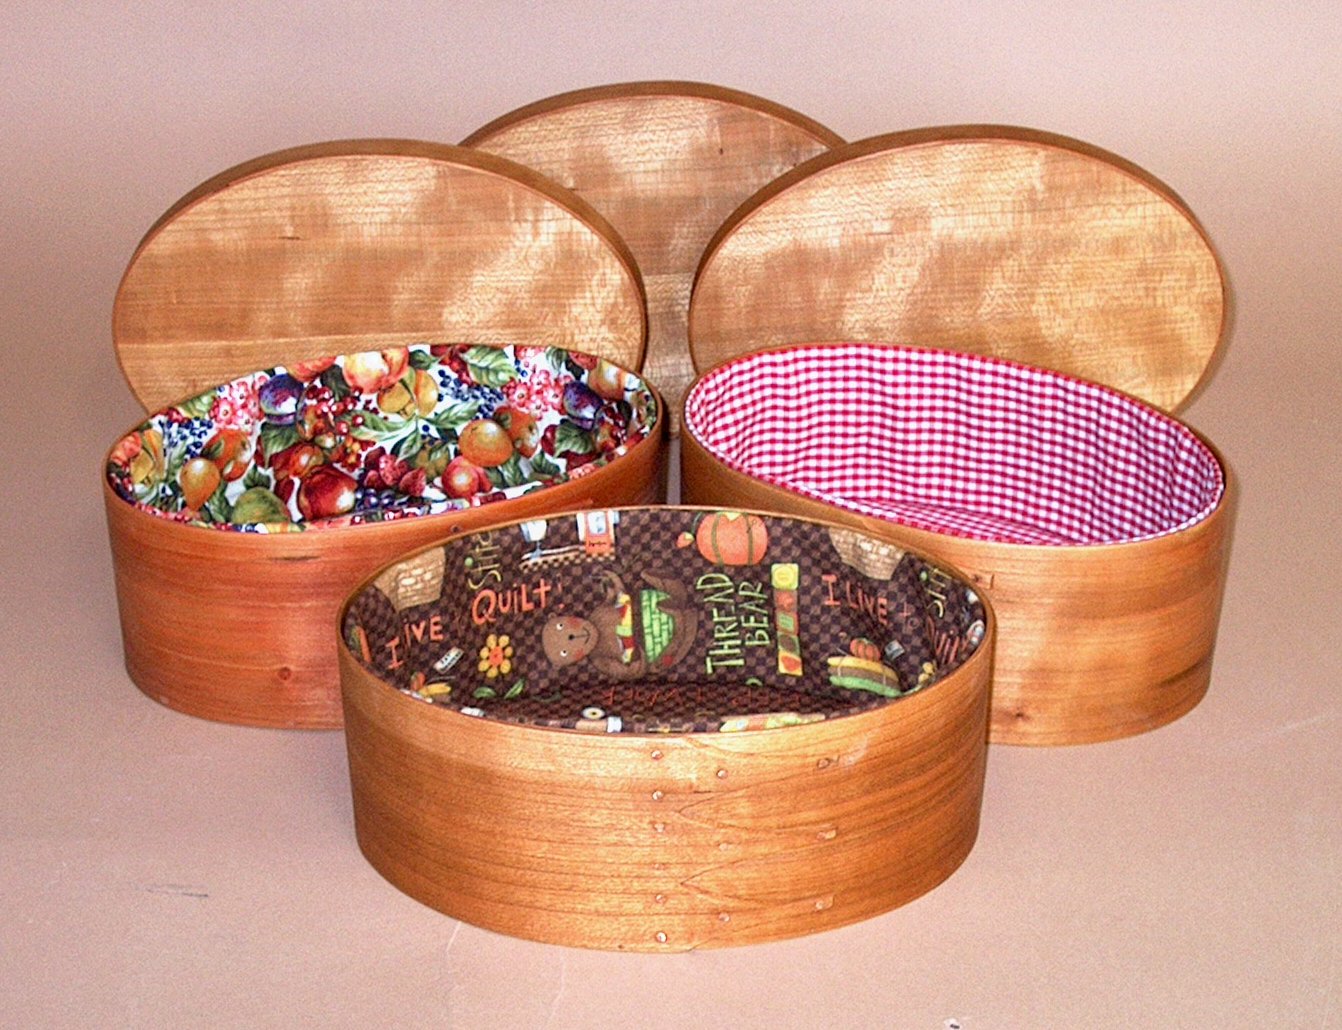 Shaker Oval Boxes